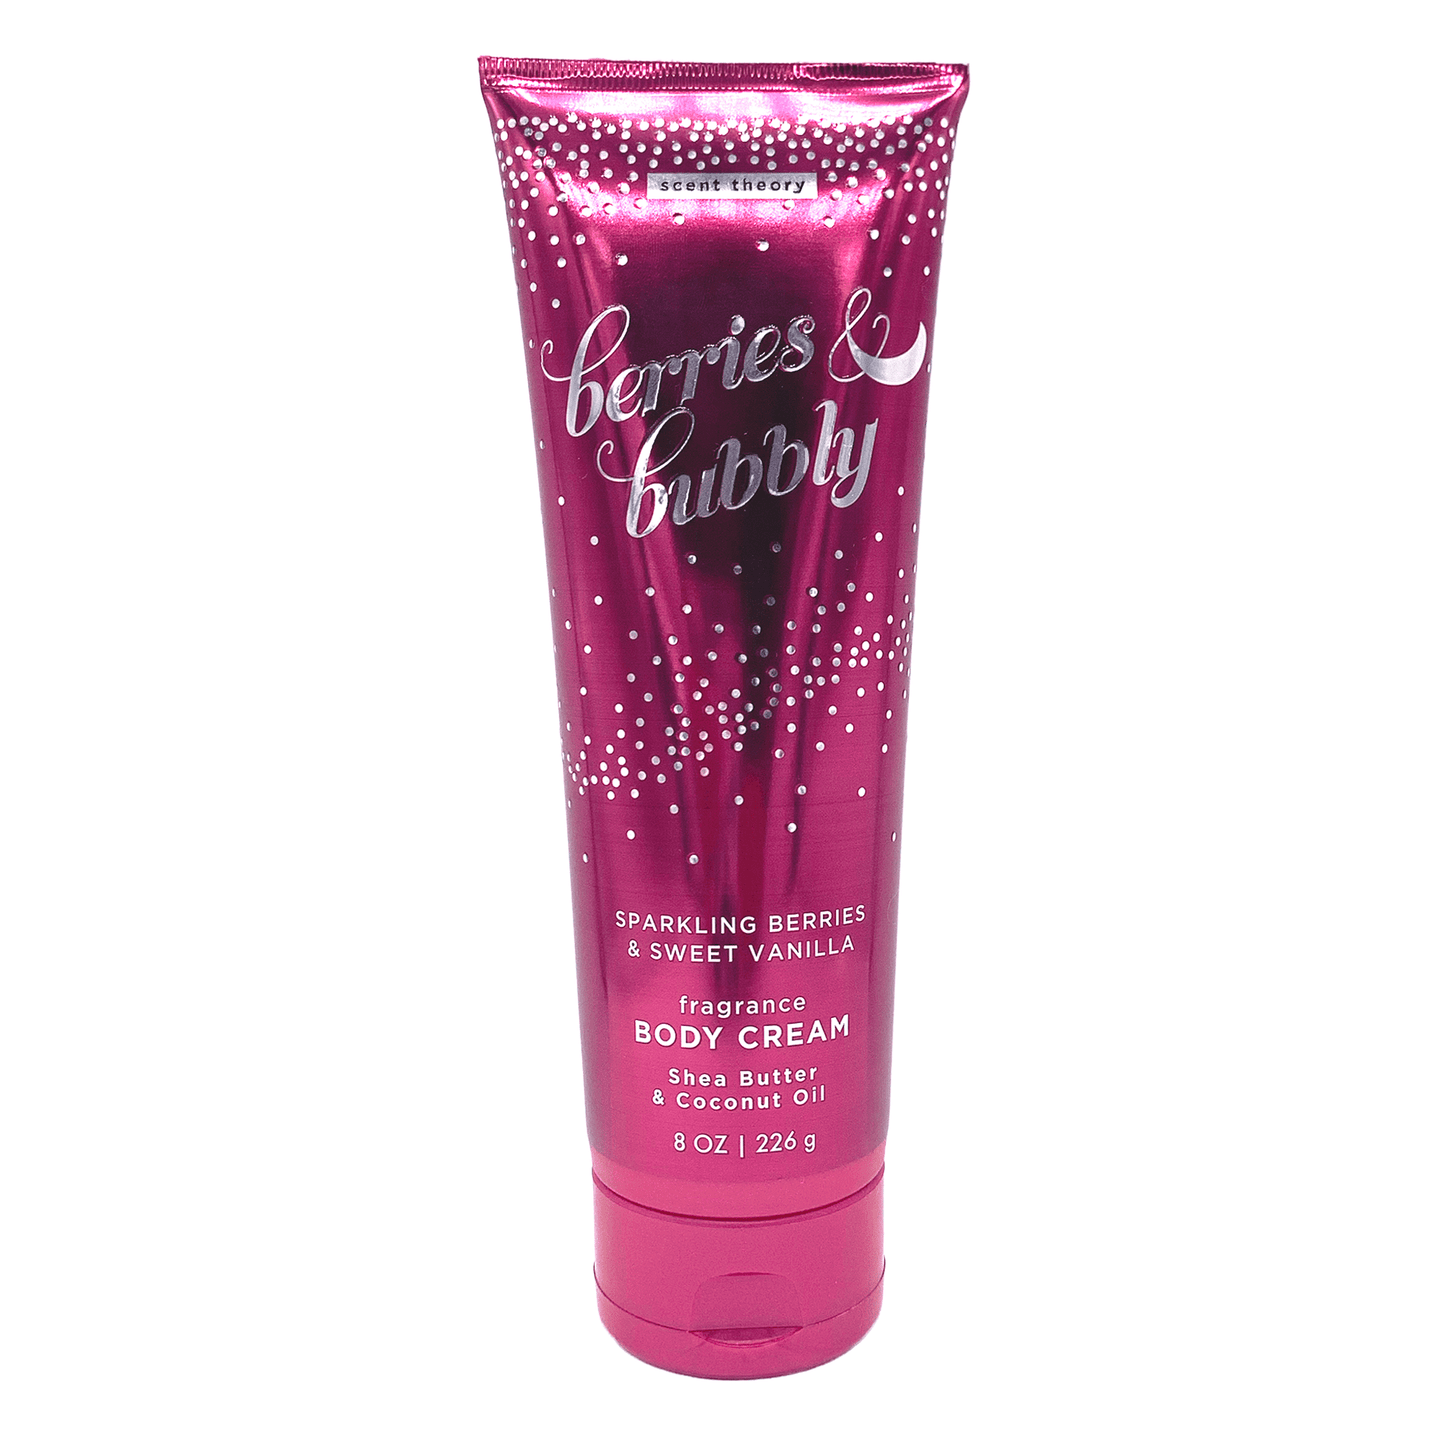 Scent Theory Hand and Body Cream with Shea Butter, Berries and Bubbly, 8 oz, for all skin types